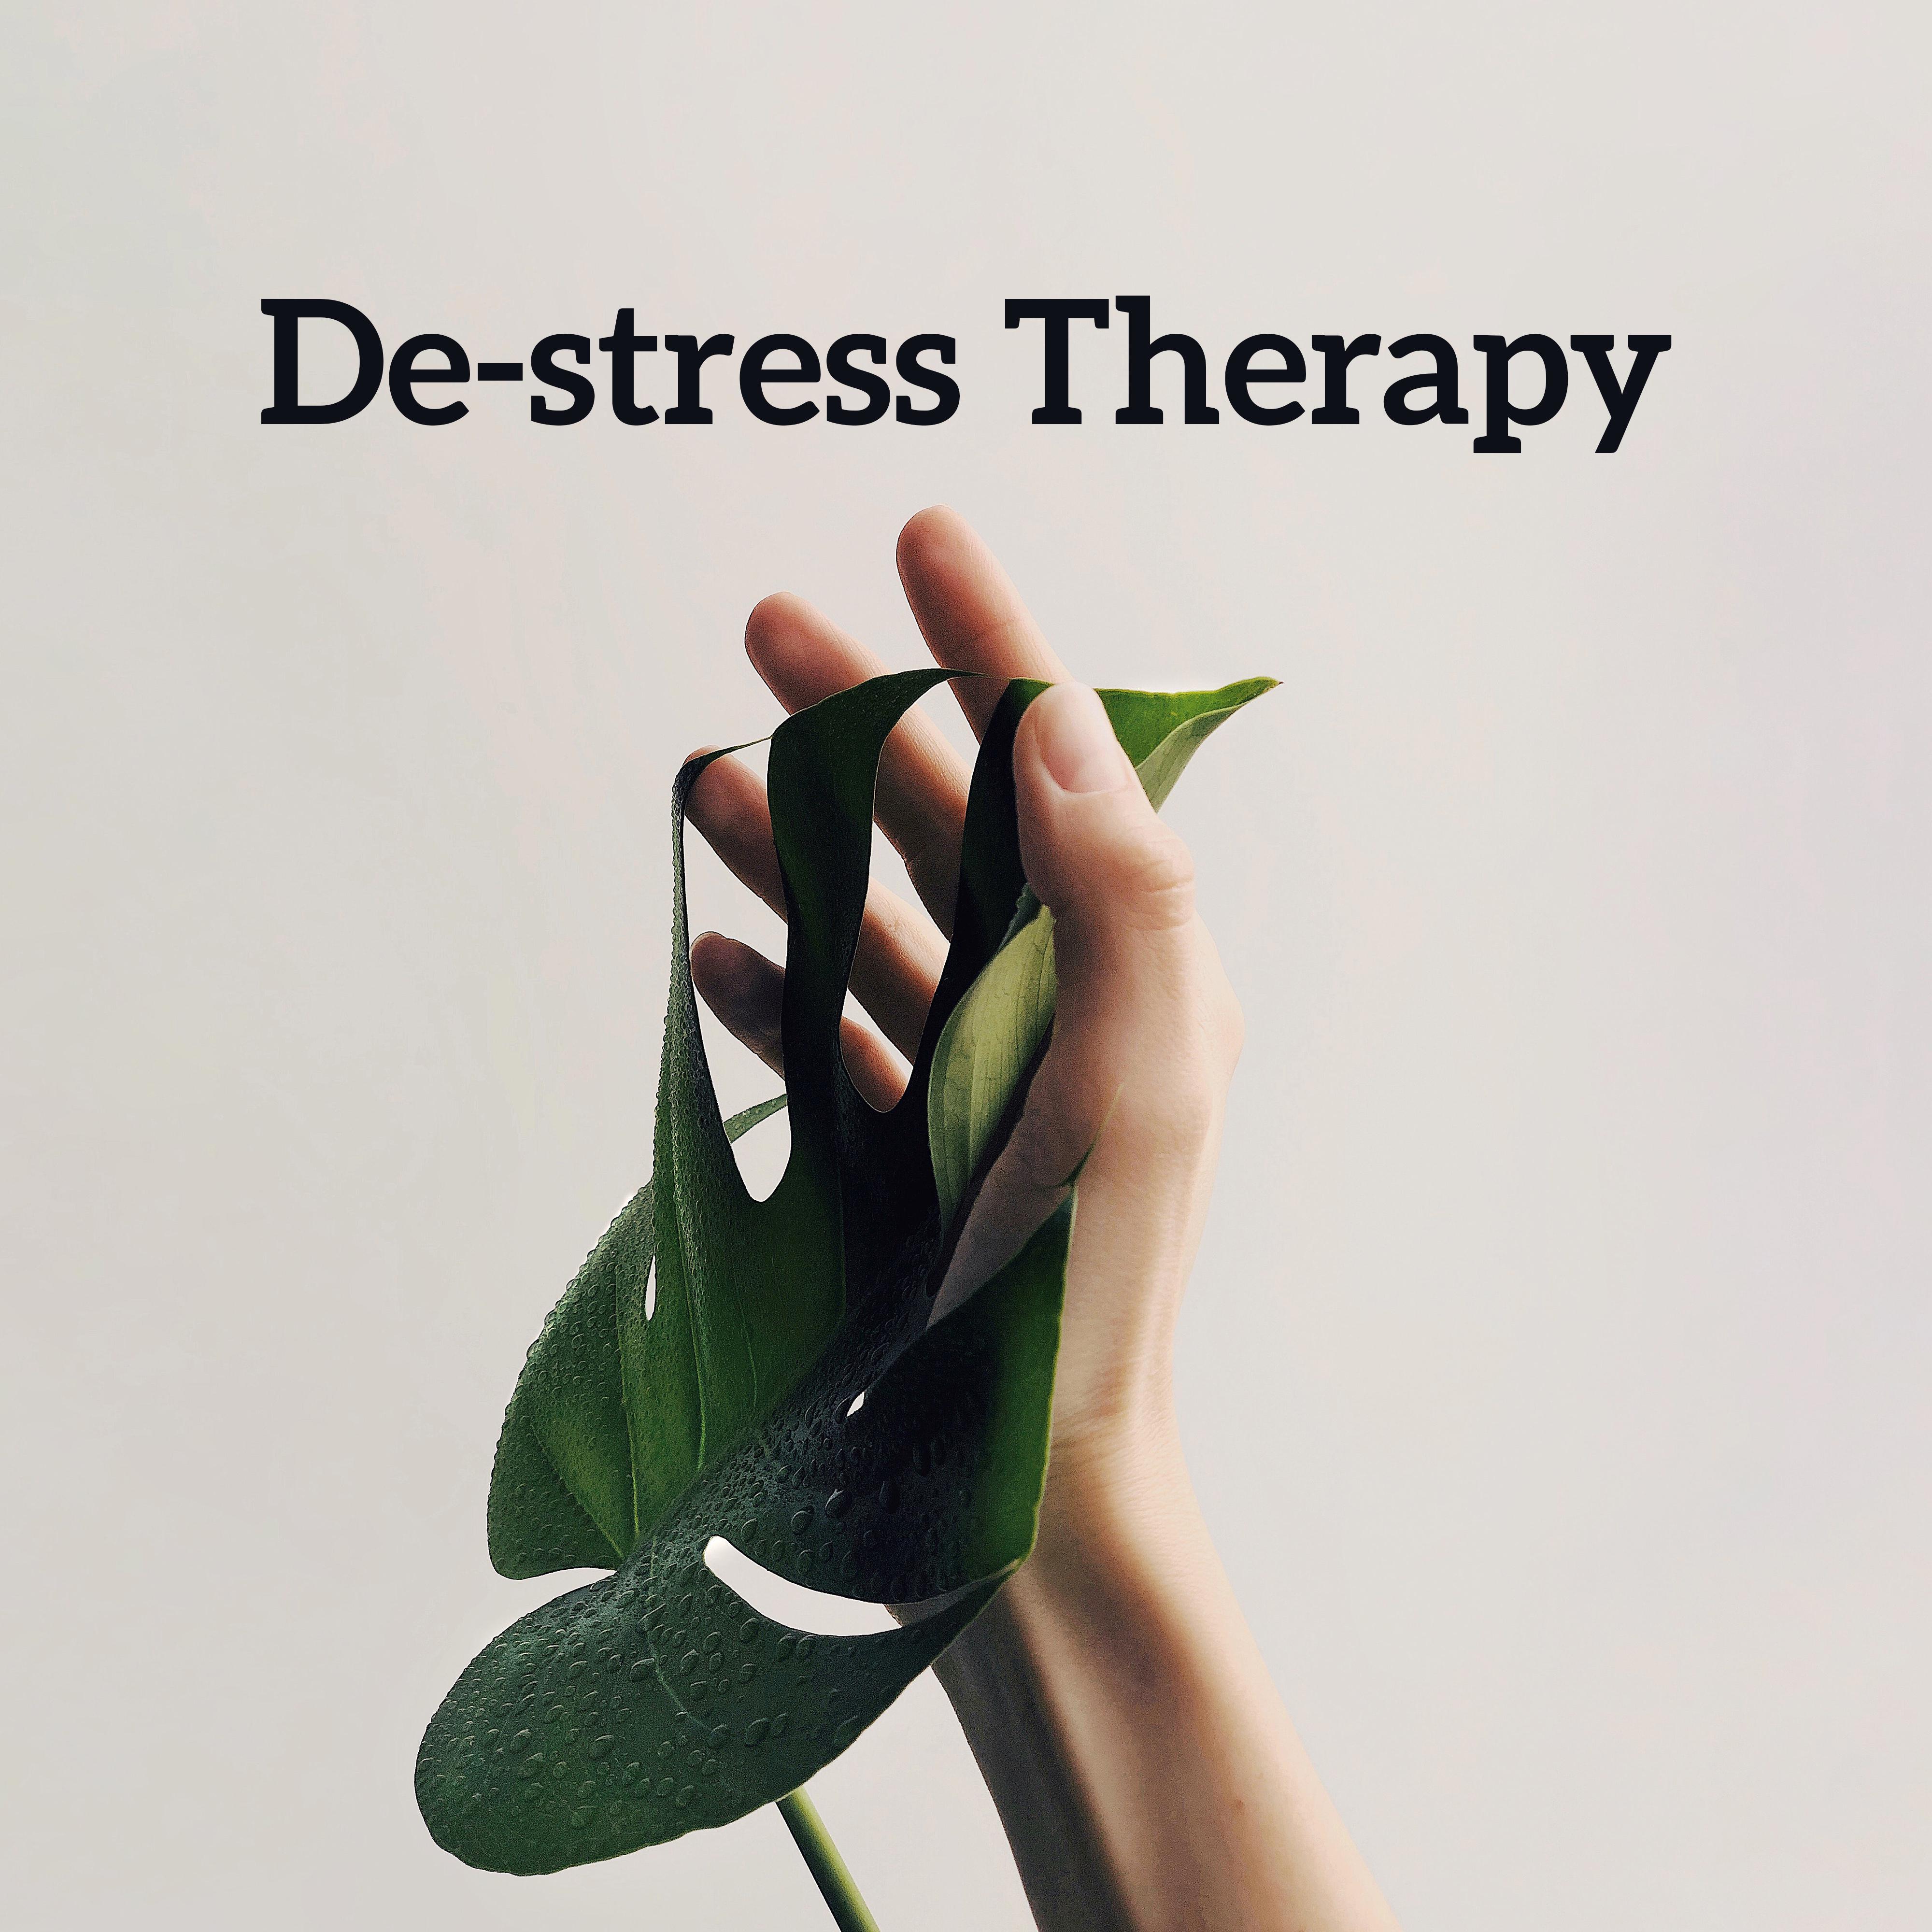 De-stress Therapy: Best Music to Relieve Stress and Tension, Relax and Respite, Rest and Chill Out